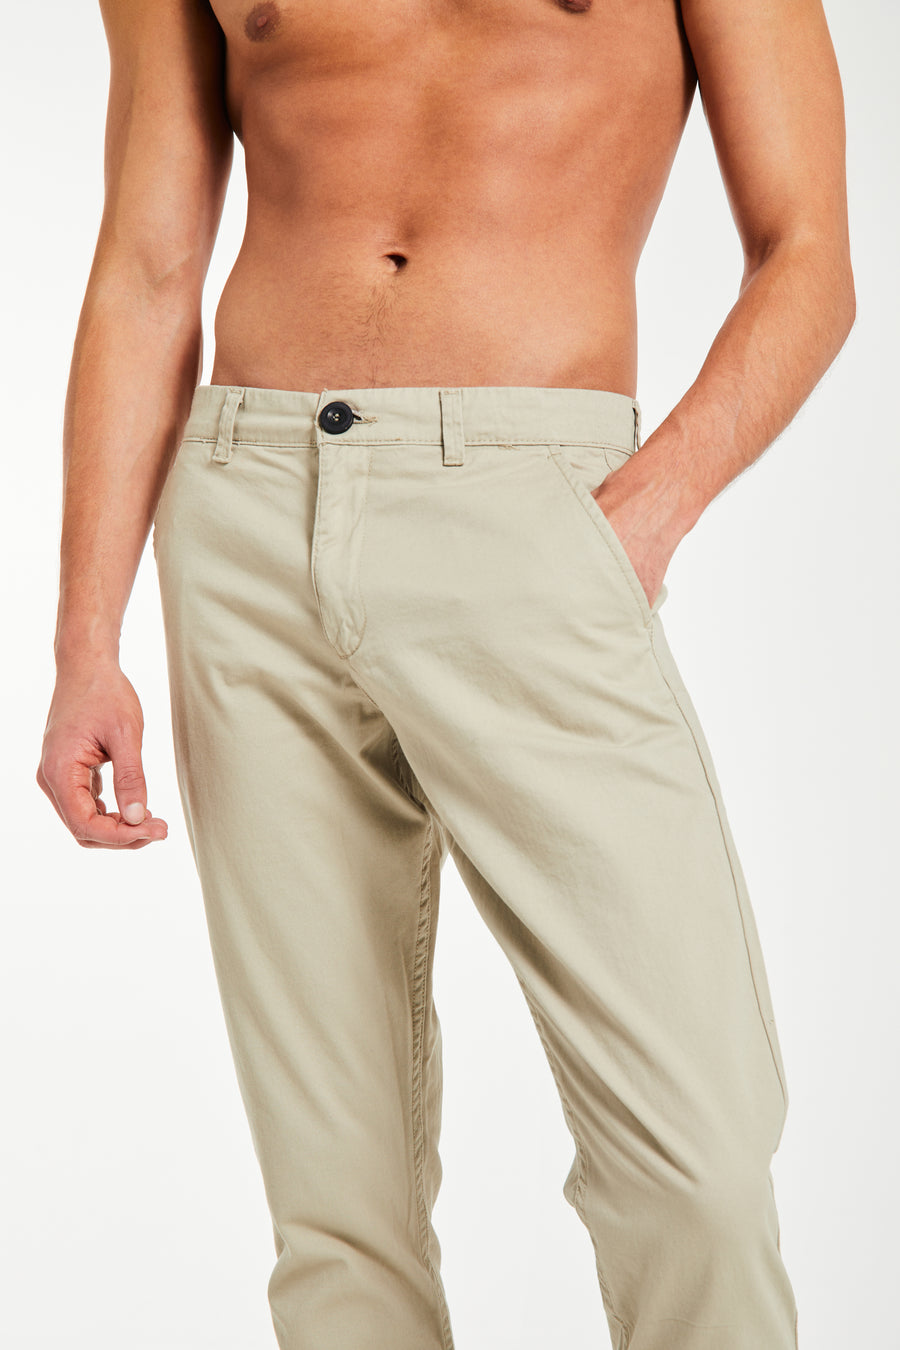 Men's chino sale in light beige with black button